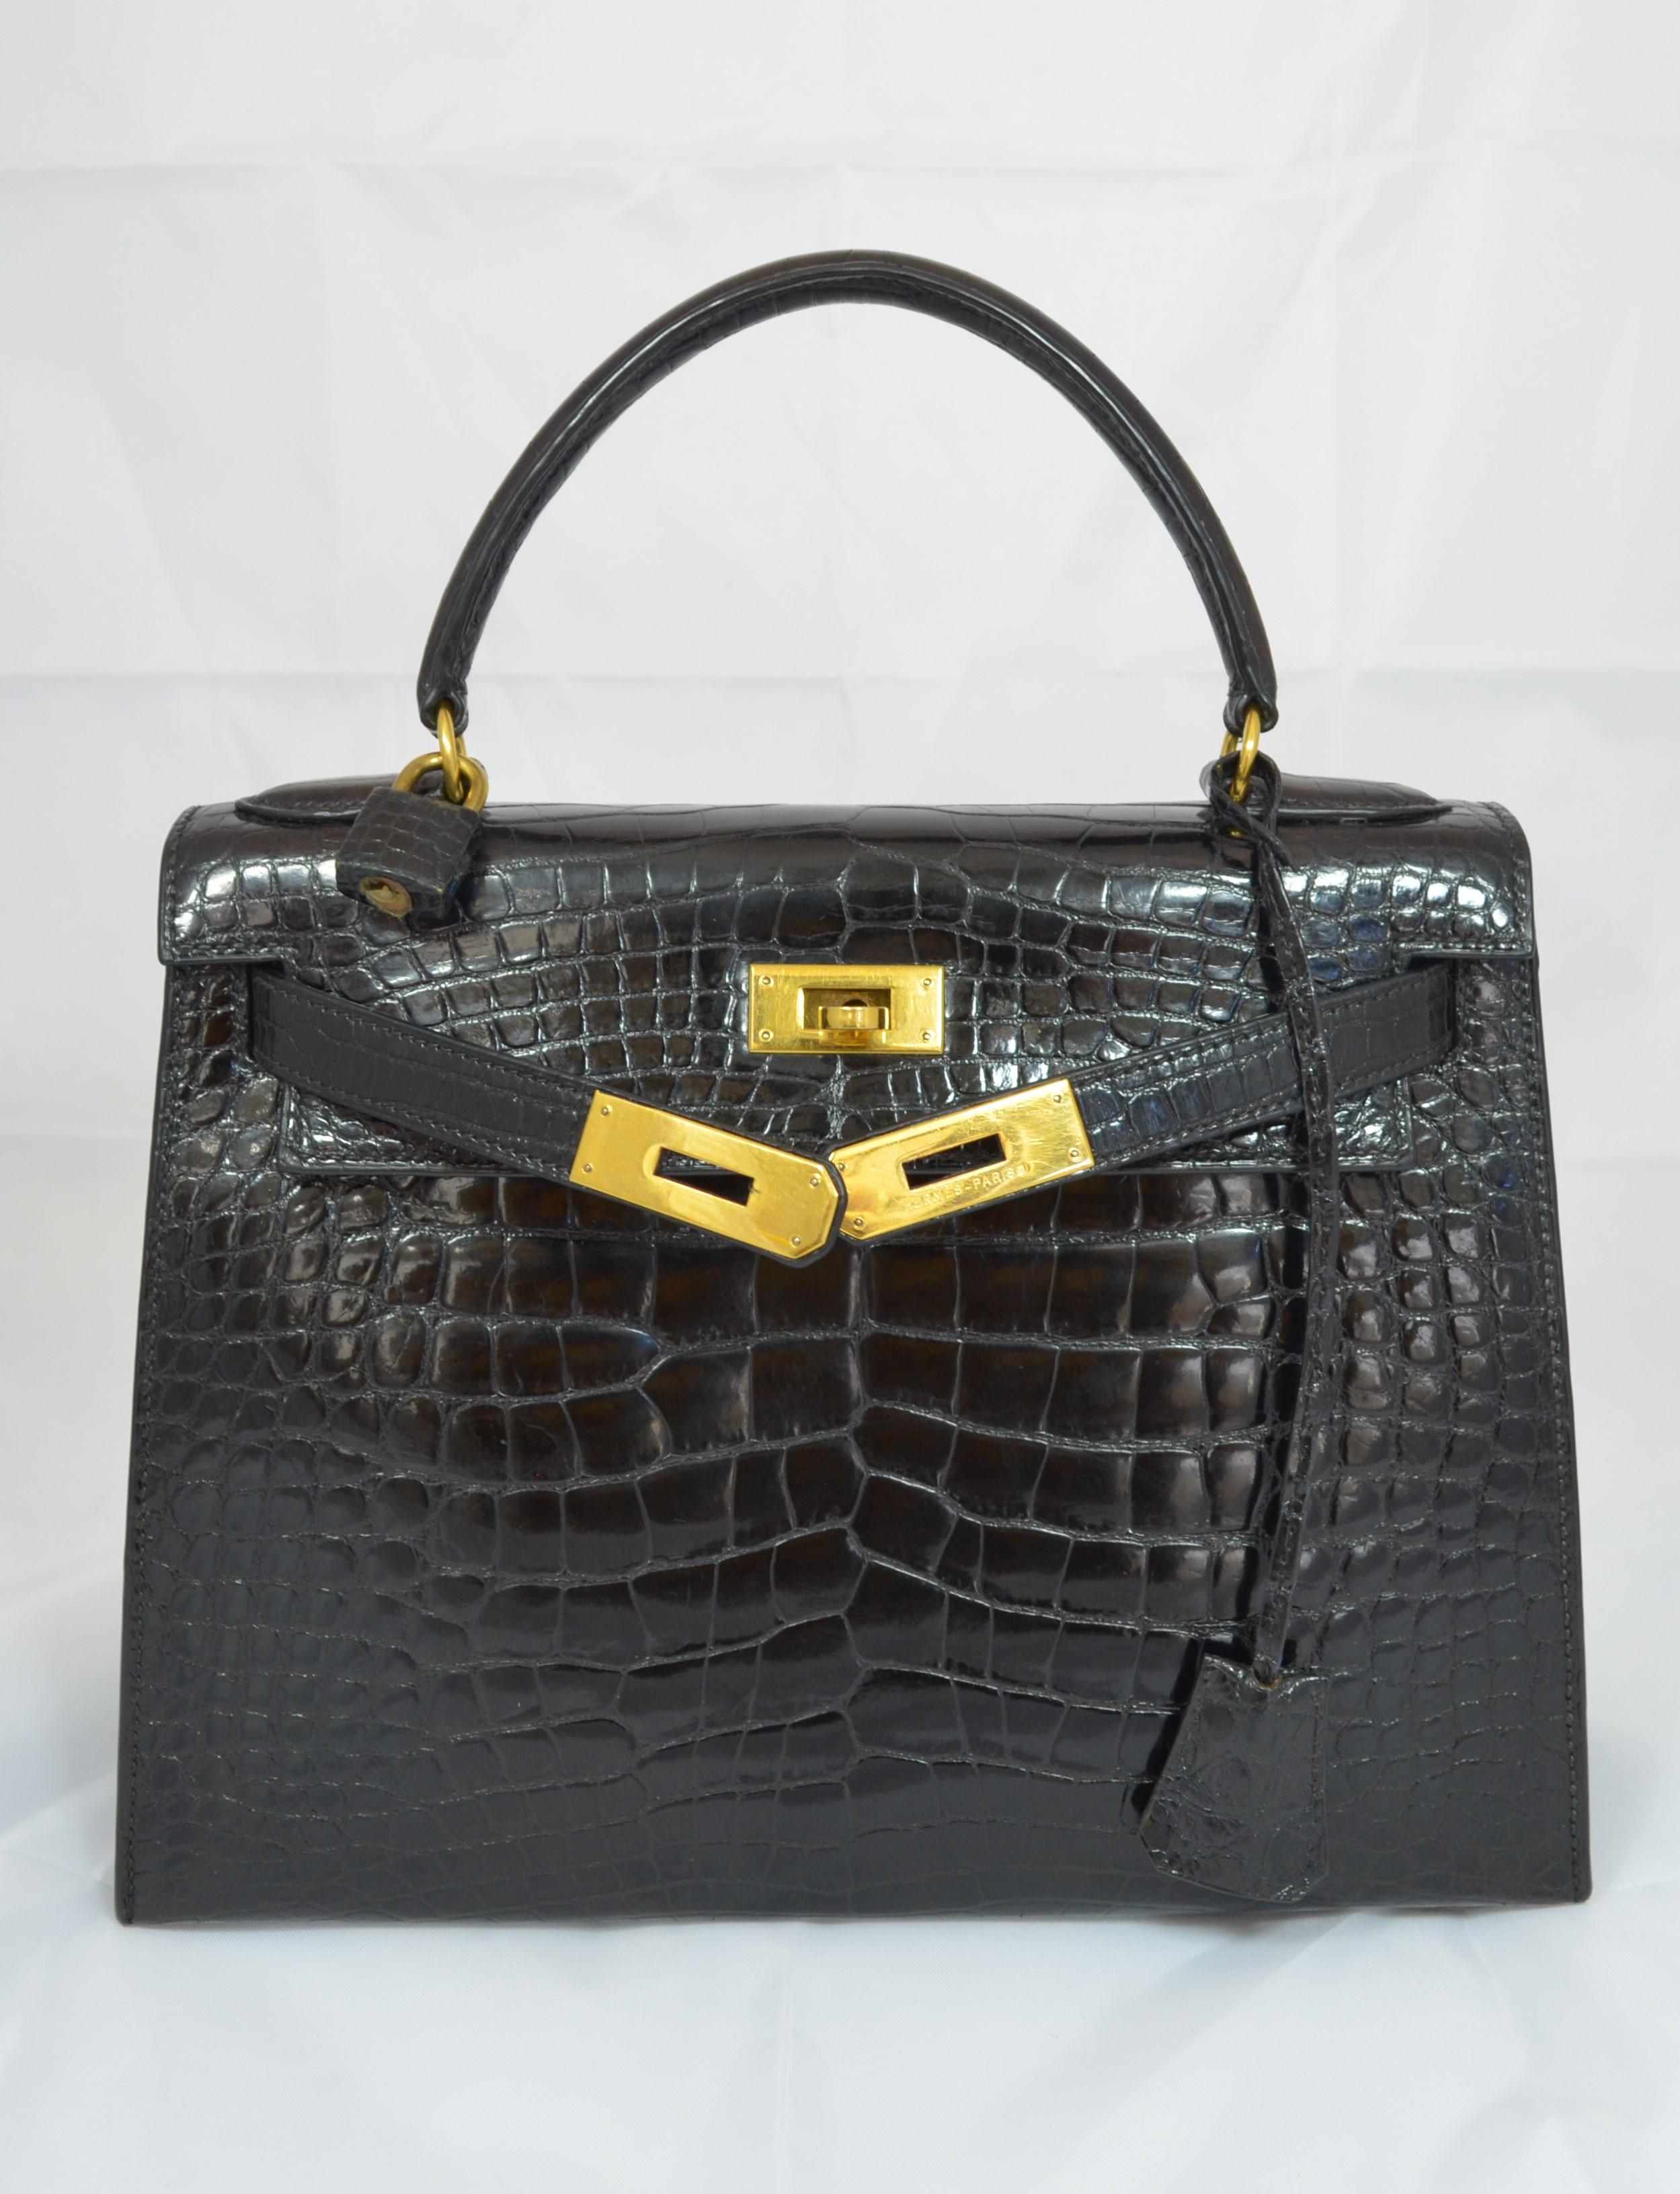 Vintage Hermes Kelly bag 28cm featured in black crocodile skin with gold hardware. Bag is in wonderful vintage condition with some normal but light wears throughout. There are no major flaws to mention. Includes original dustbag. Made in France, V